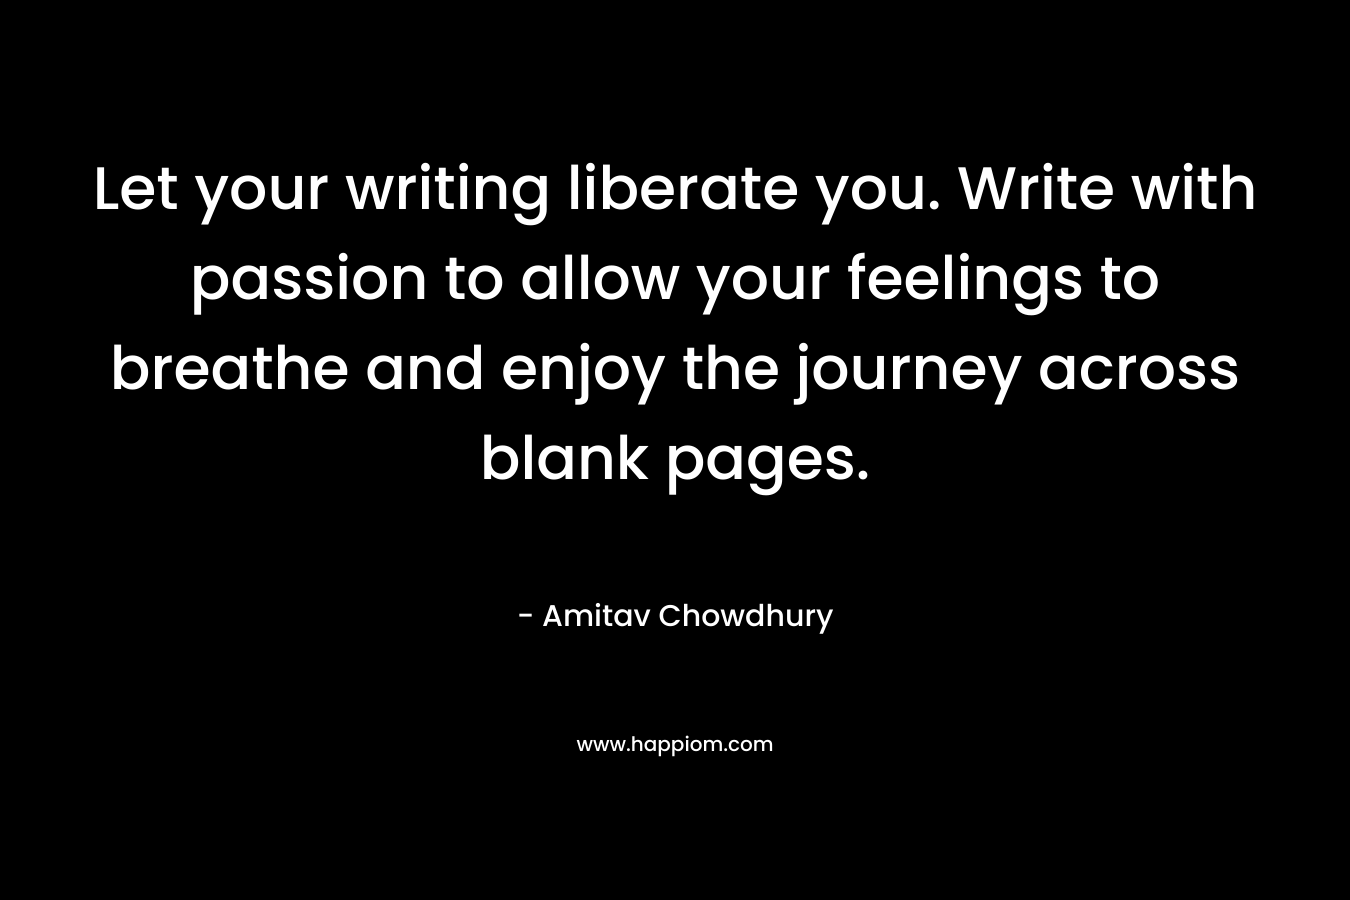 Let your writing liberate you. Write with passion to allow your feelings to breathe and enjoy the journey across blank pages.